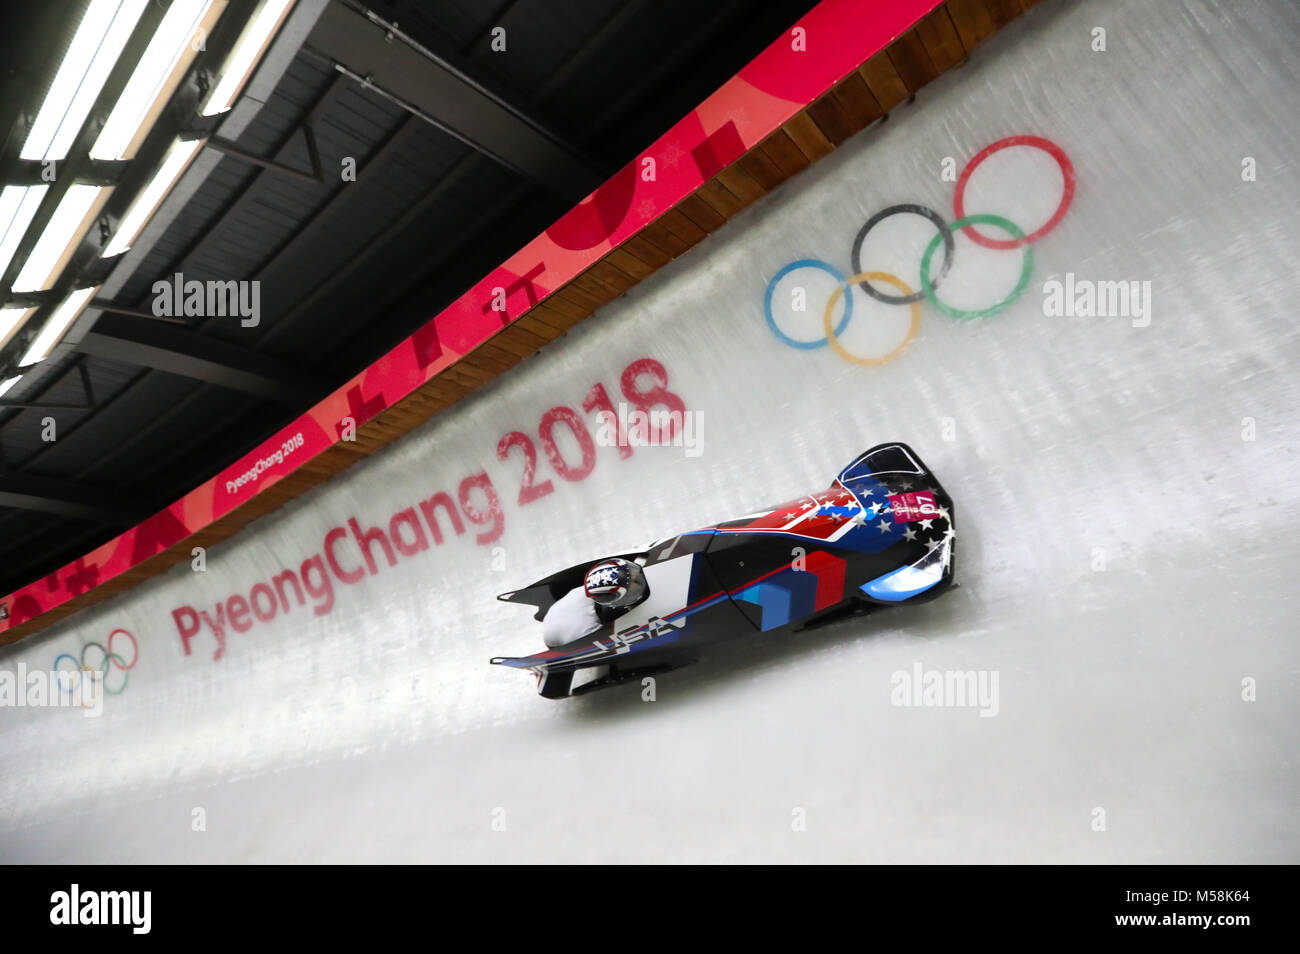 USA's Jamie Greubel Poser (pilot) and Aja Evans compete in the Two Woman Bobsleigh Heat 3 at the Olympic Sliding Centre during day twelve of the PyeongChang 2018 Winter Olympic Games in South Korea. Stock Photo